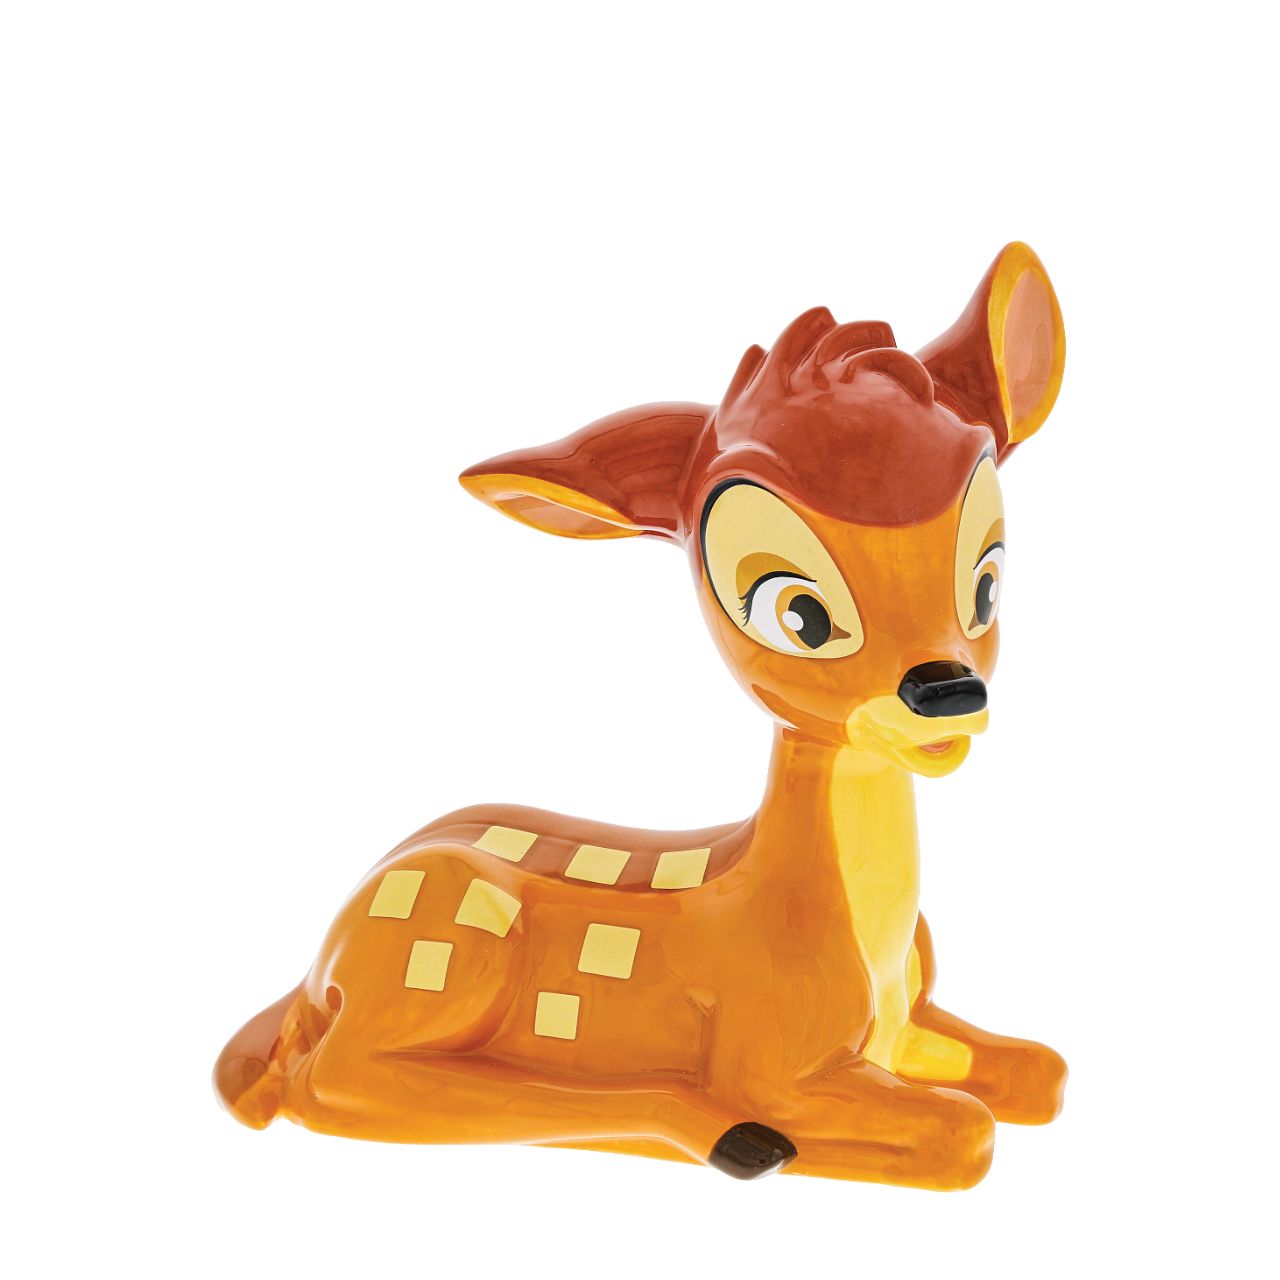 Enchanting Disney Collection The Young Prince Bambi Money Bank  Featured here is Bambi as a fawn, with his iconic orange fur coat, wheat spots and brown stripe that ran from his head down to his tail. The Young Prince sculpted ceramic money bank is perfect for any Disney fan wishing to save their pennies.